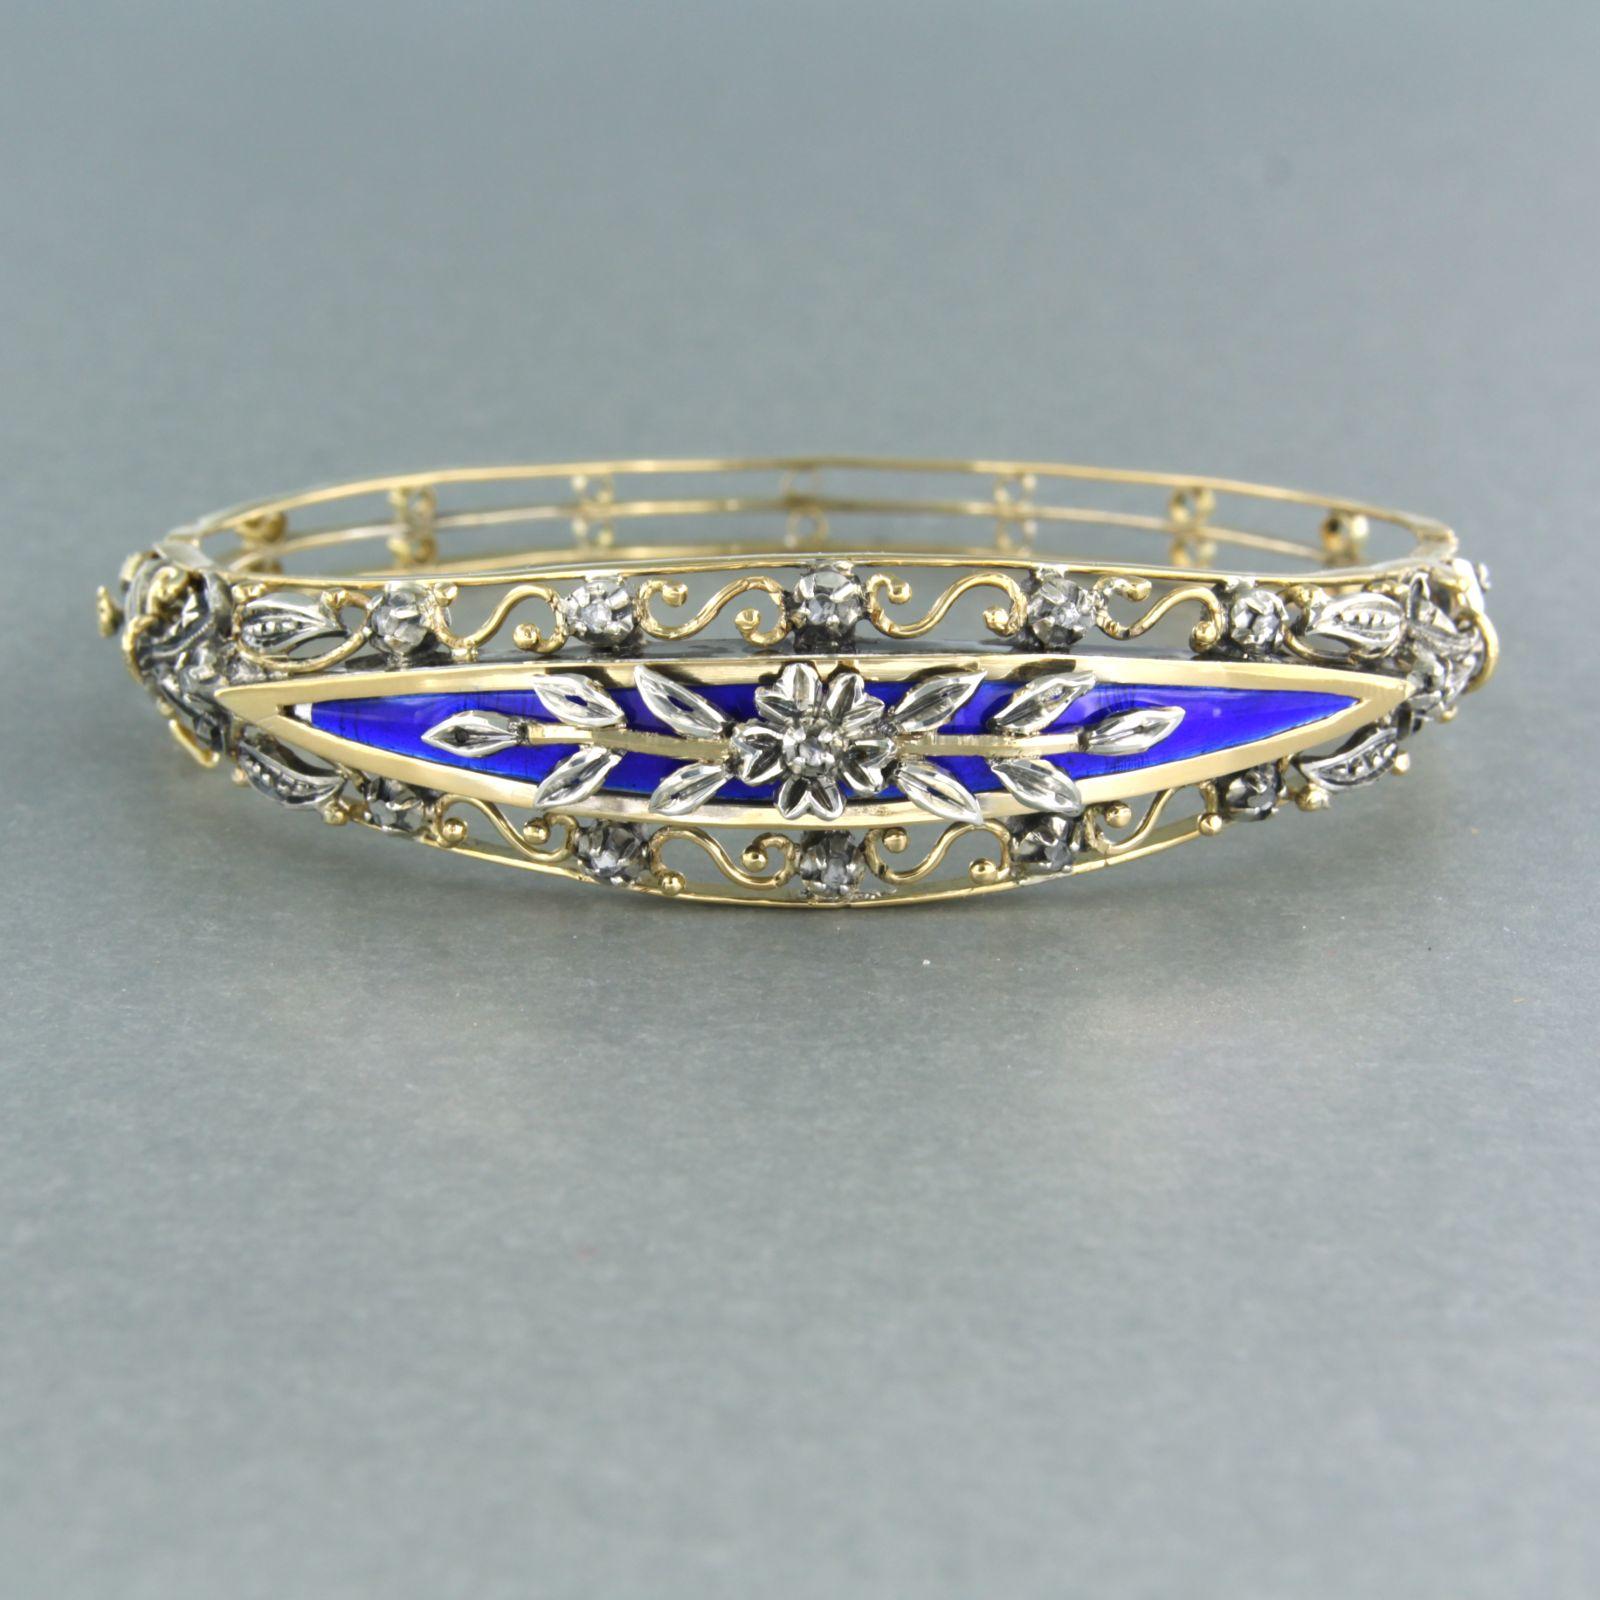 18k yellow gold bracelet with silver decorations and decorated with blue enamel set with rose diamonds set on silver - inner size 5.9 cm x 4.9 cm

detailed description:

the inner size of the bracelet is 5.9 cm by 4.9 cm wide

the center piece of